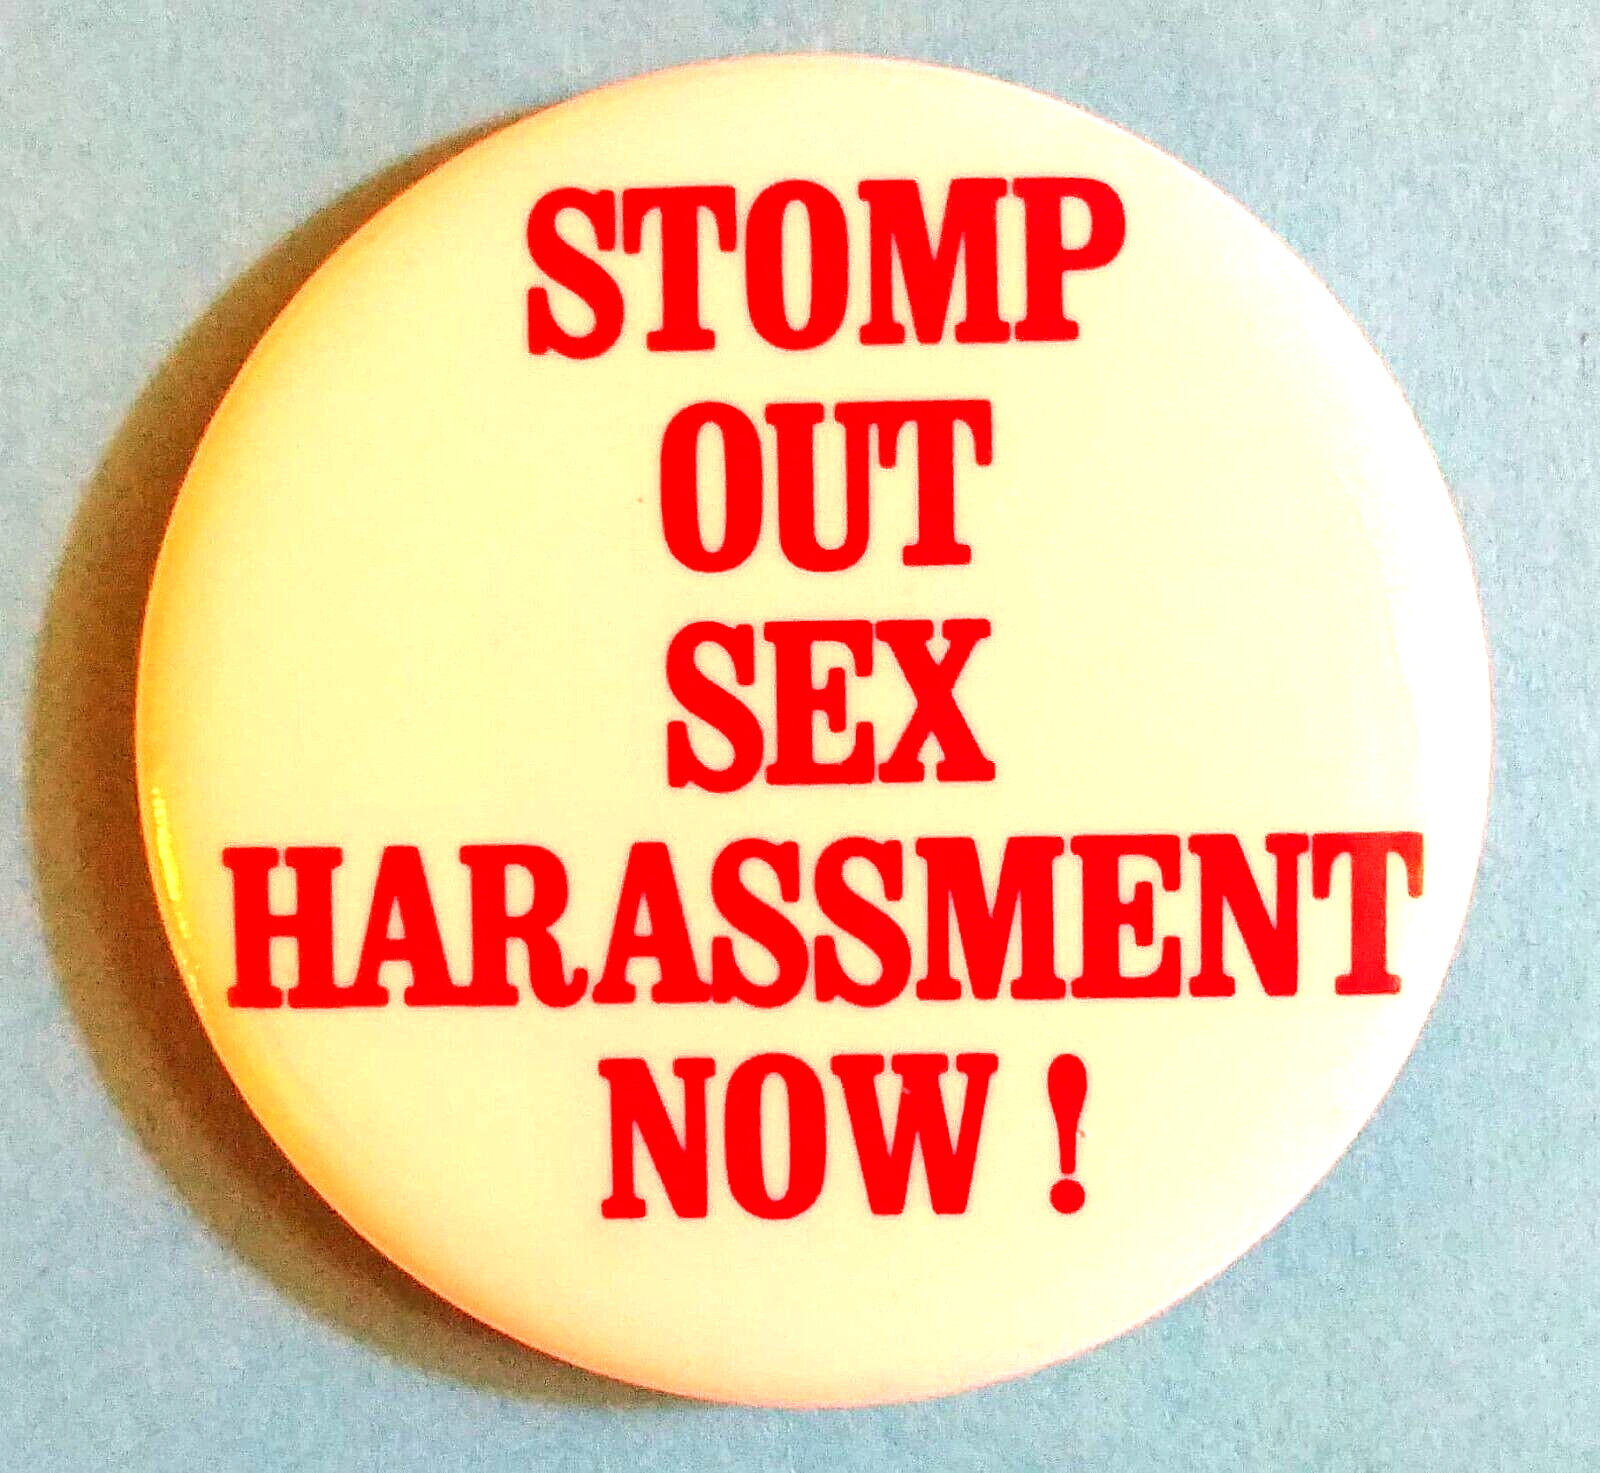 STOMP OUT SEX HARASSMENT NOW  1974 Newly instituted co-ed colleges protest pin